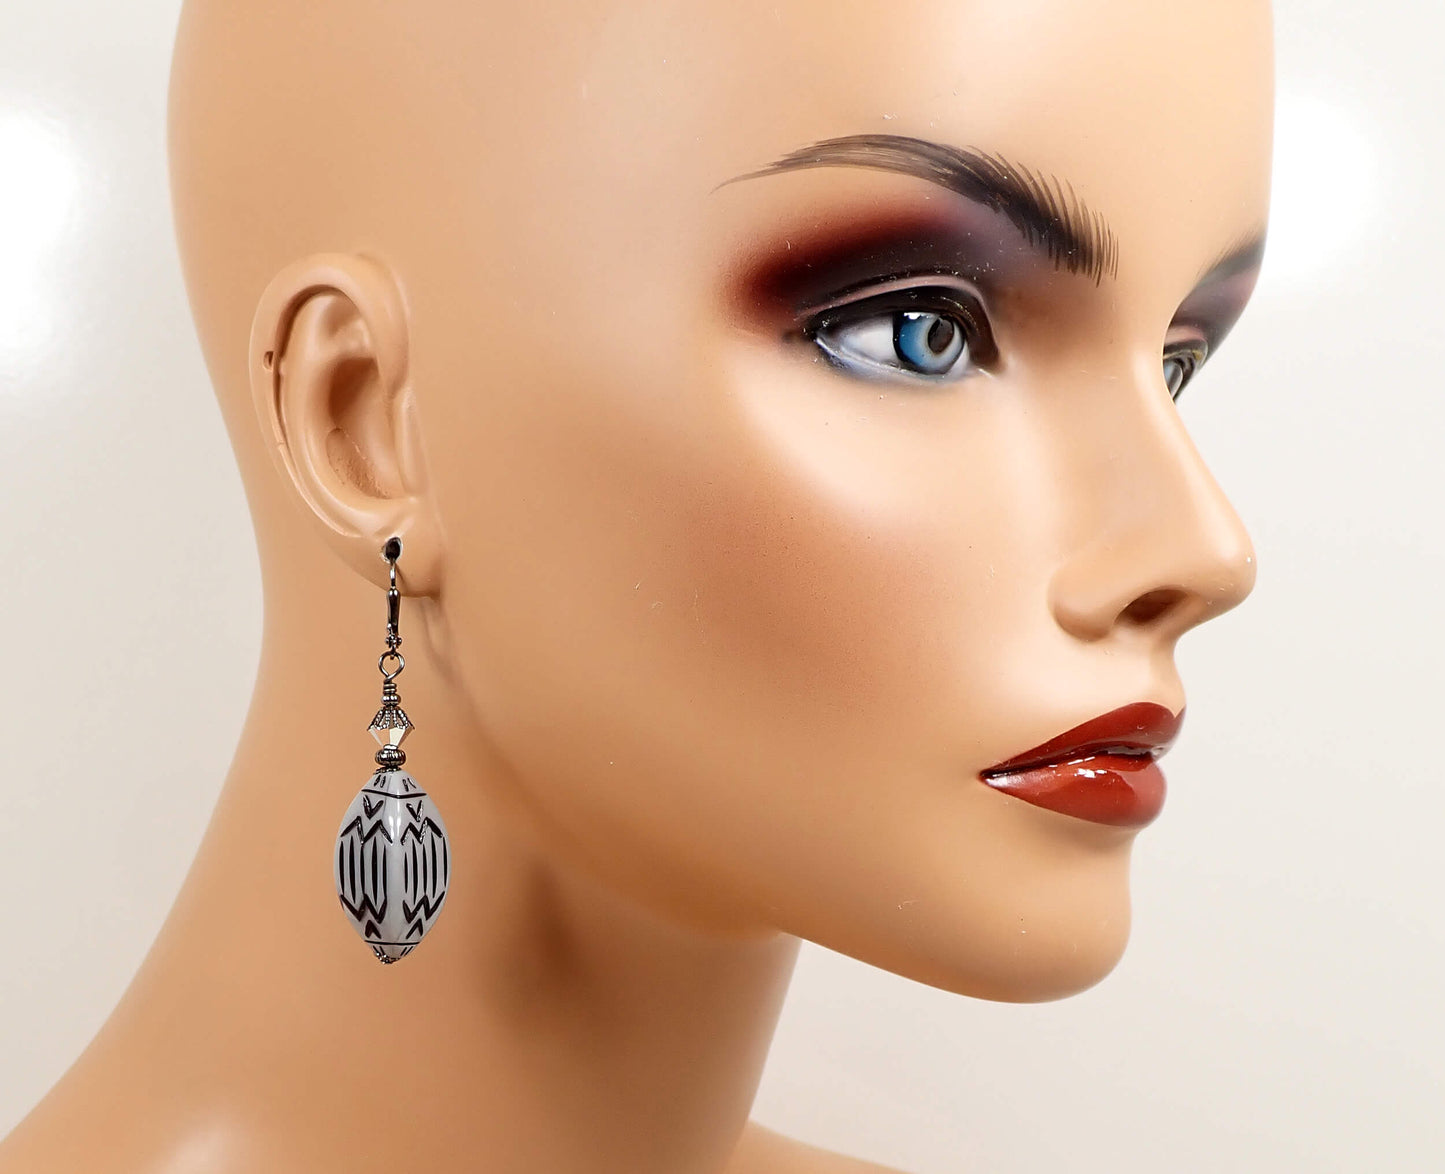 Large Gray Lucite Handmade Drop Earrings with Black Design, Gunmetal Hook Lever Back or Clip On